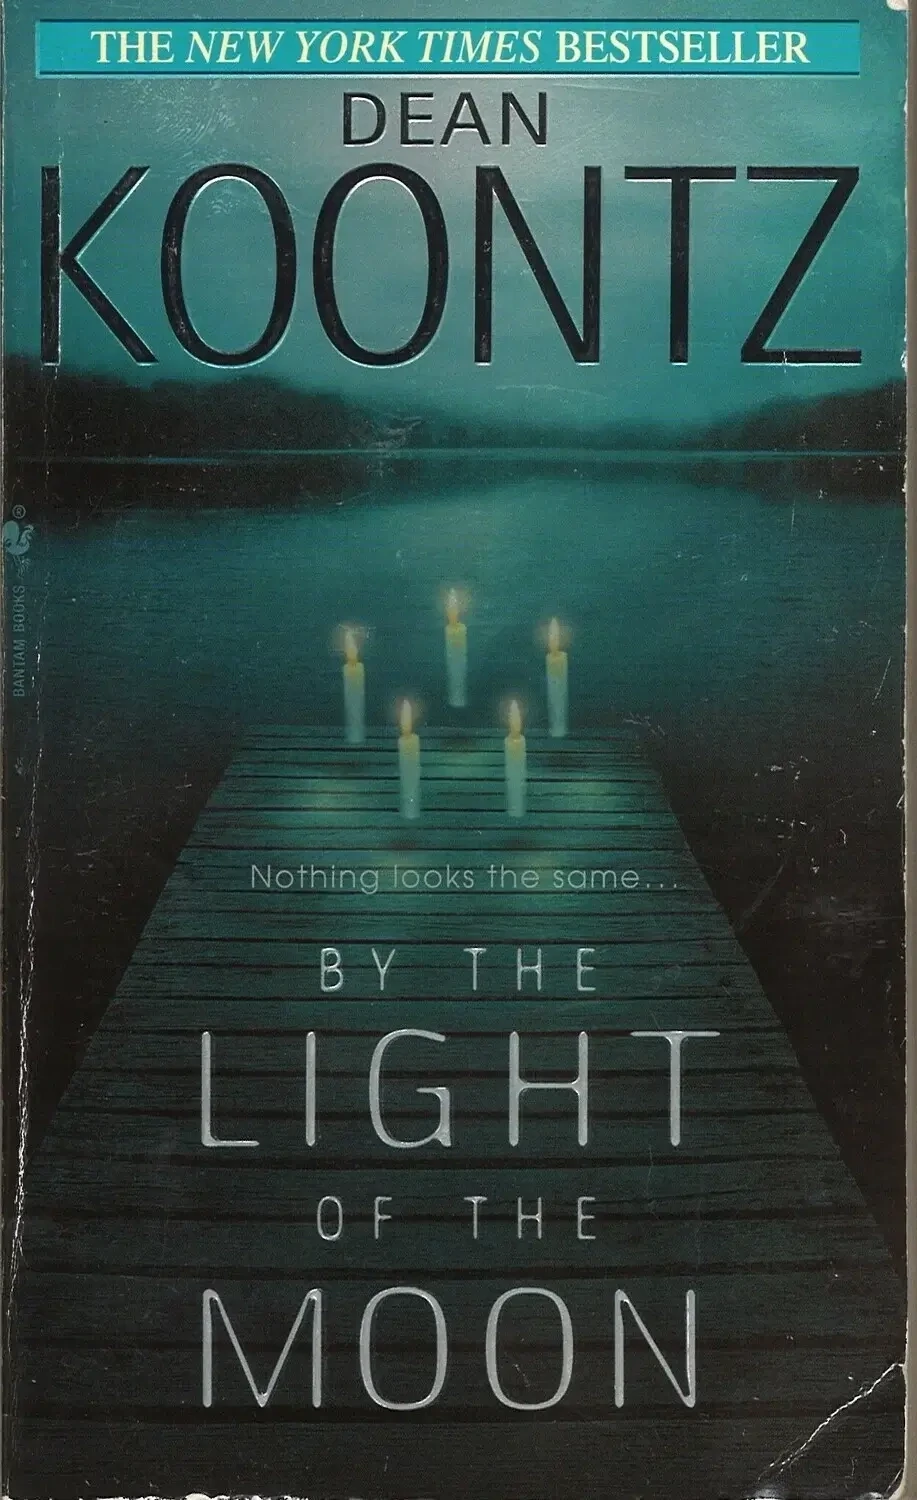 By the Light of the Moon, Dean Koontz